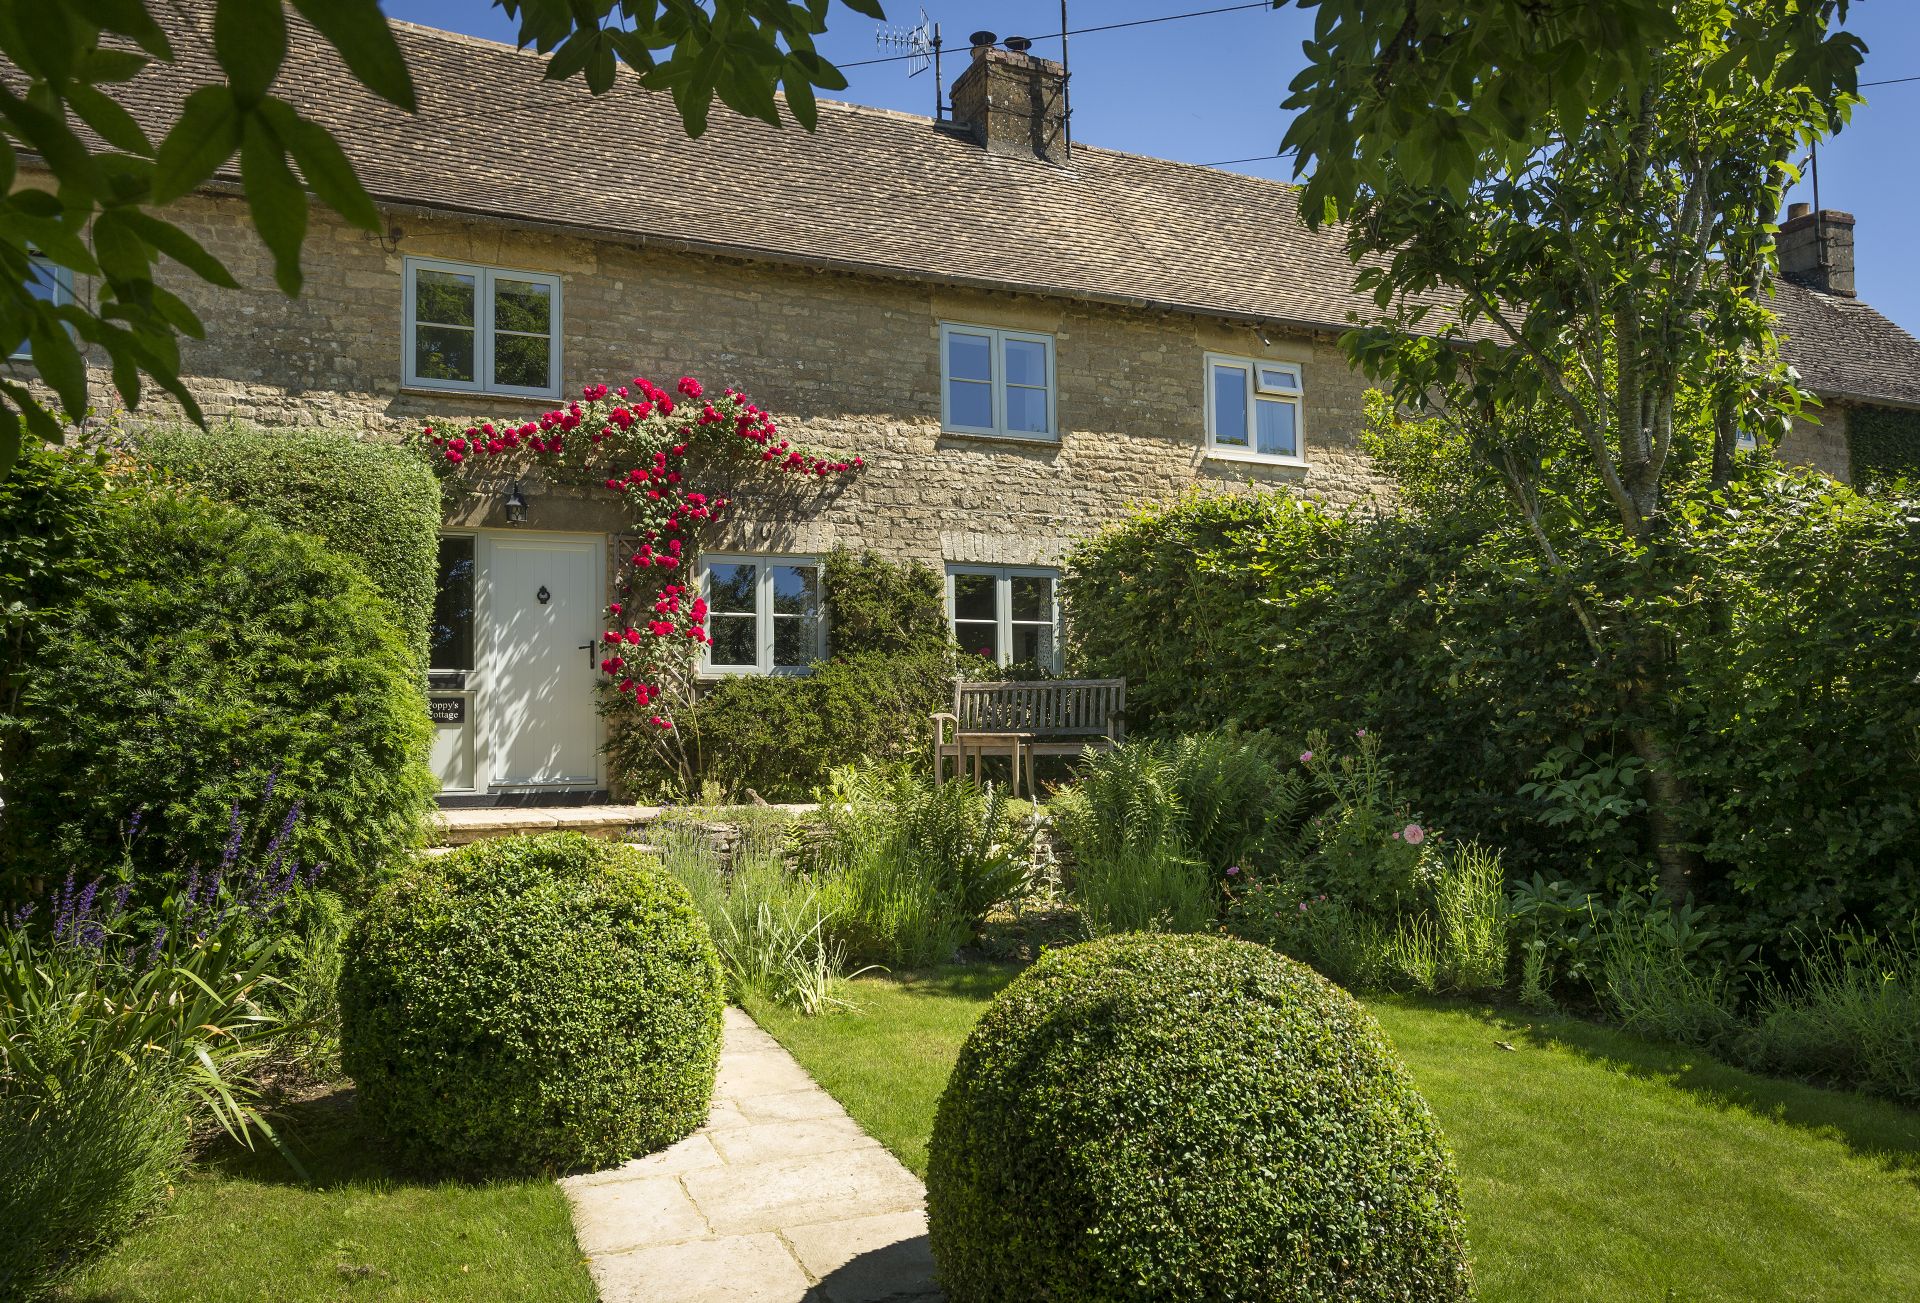 Details about a cottage Holiday at Poppy's Cottage